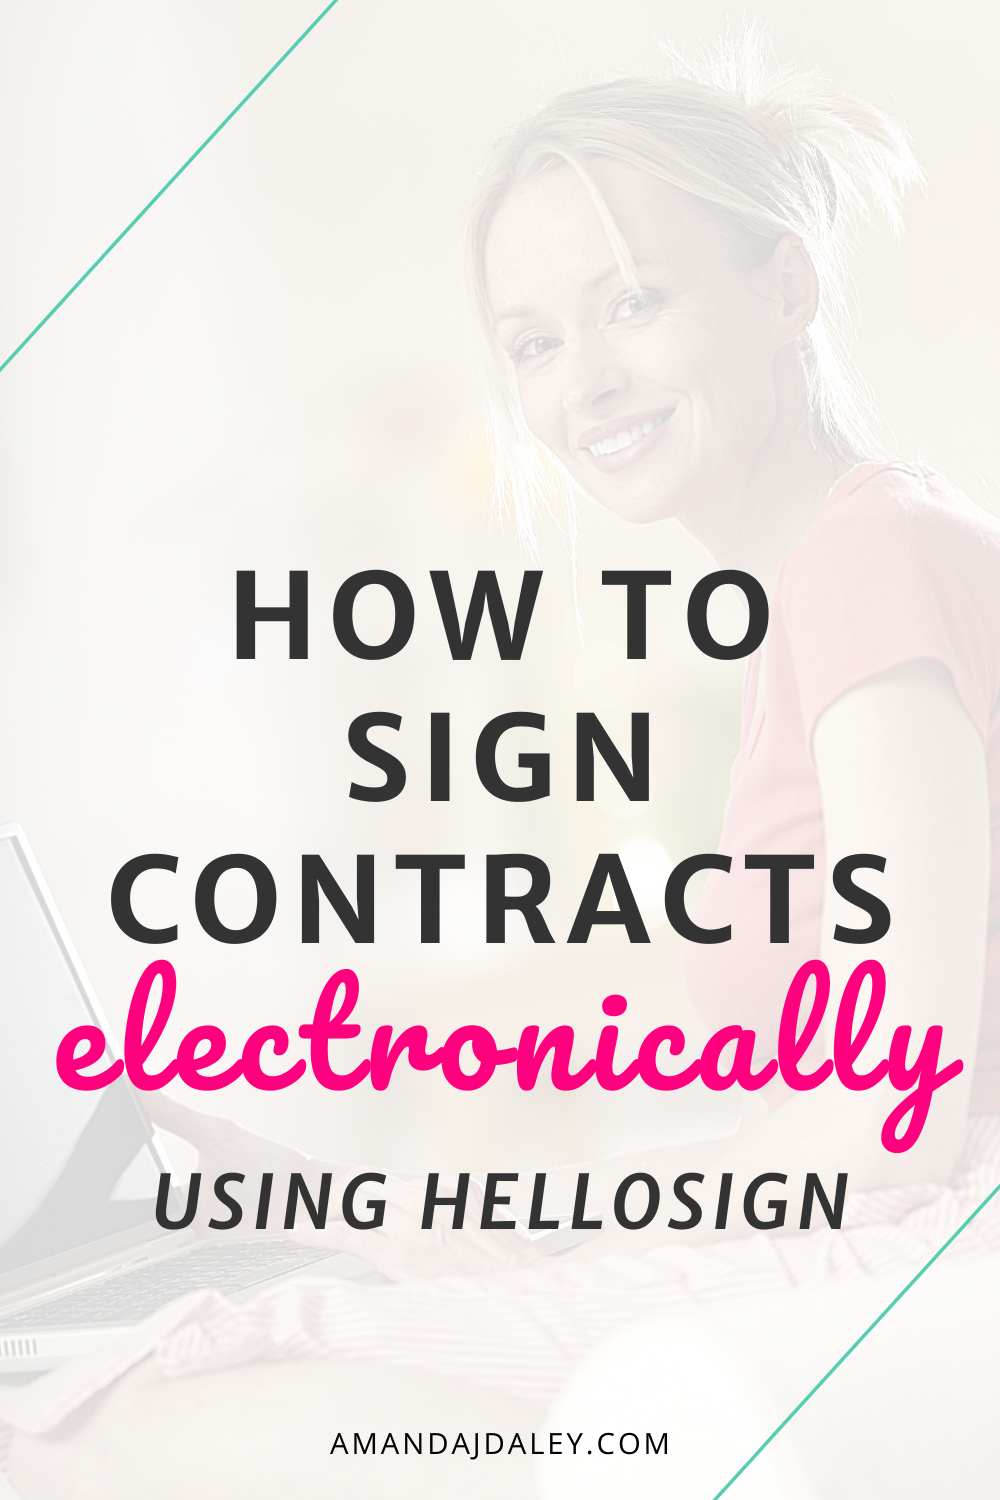 How To Sign Client Contracts Electronically (using HelloSign) — Amanda